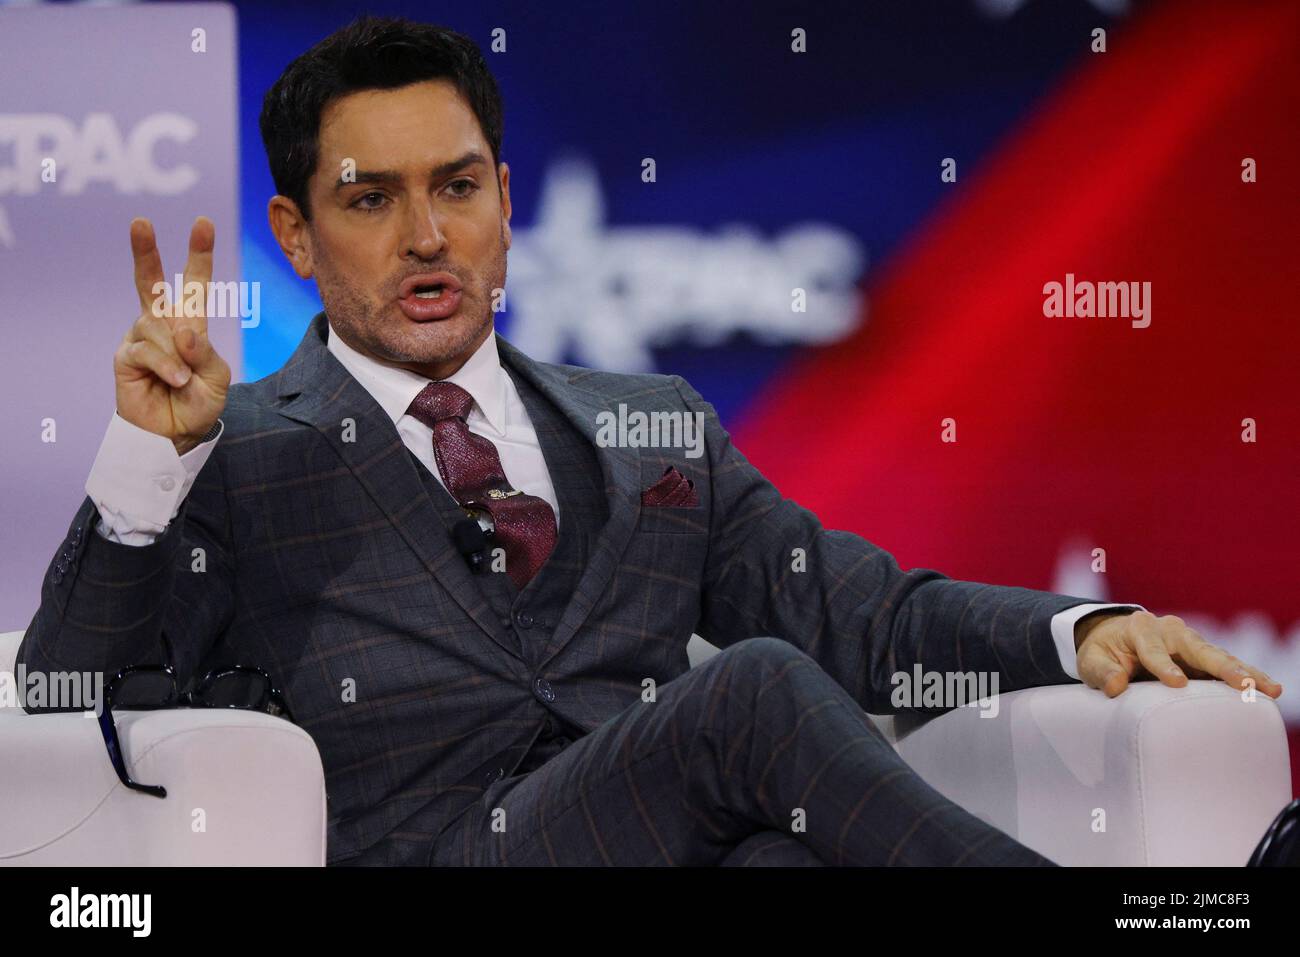 Brandon Straka, who founded #WalkAway and was convicted on charges linked to the January 6 attacks on the U.S. Capitol, speaks at the Conservative Political Action Conference (CPAC) in Dallas, Texas, U.S., August 5, 2022.  REUTERS/Brian Snyder Stock Photo